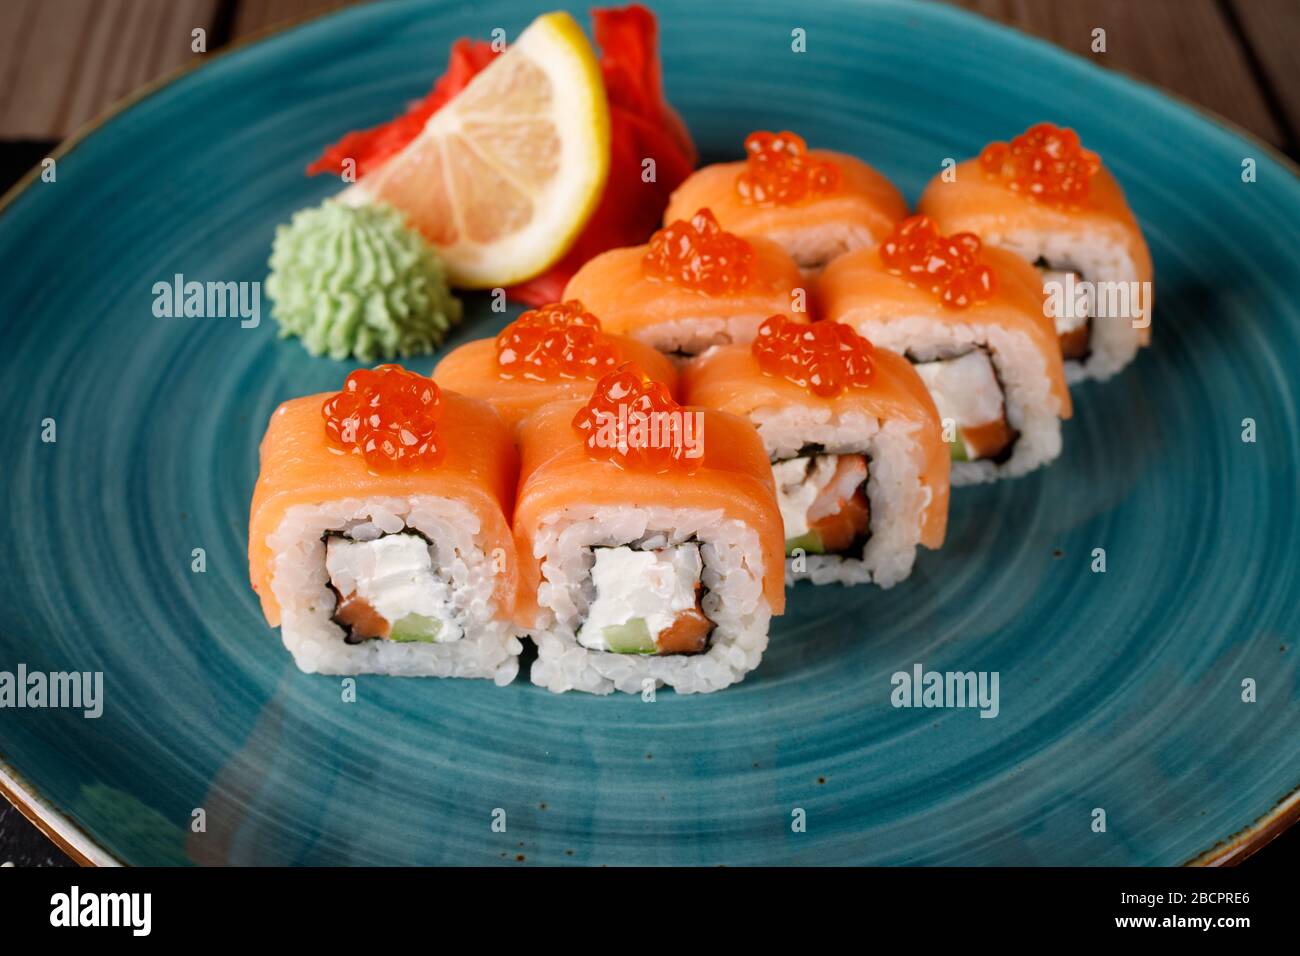 Rolls, wasabi, soy sauce, ginger on the table, avocado. The view from the top. Stock Photo